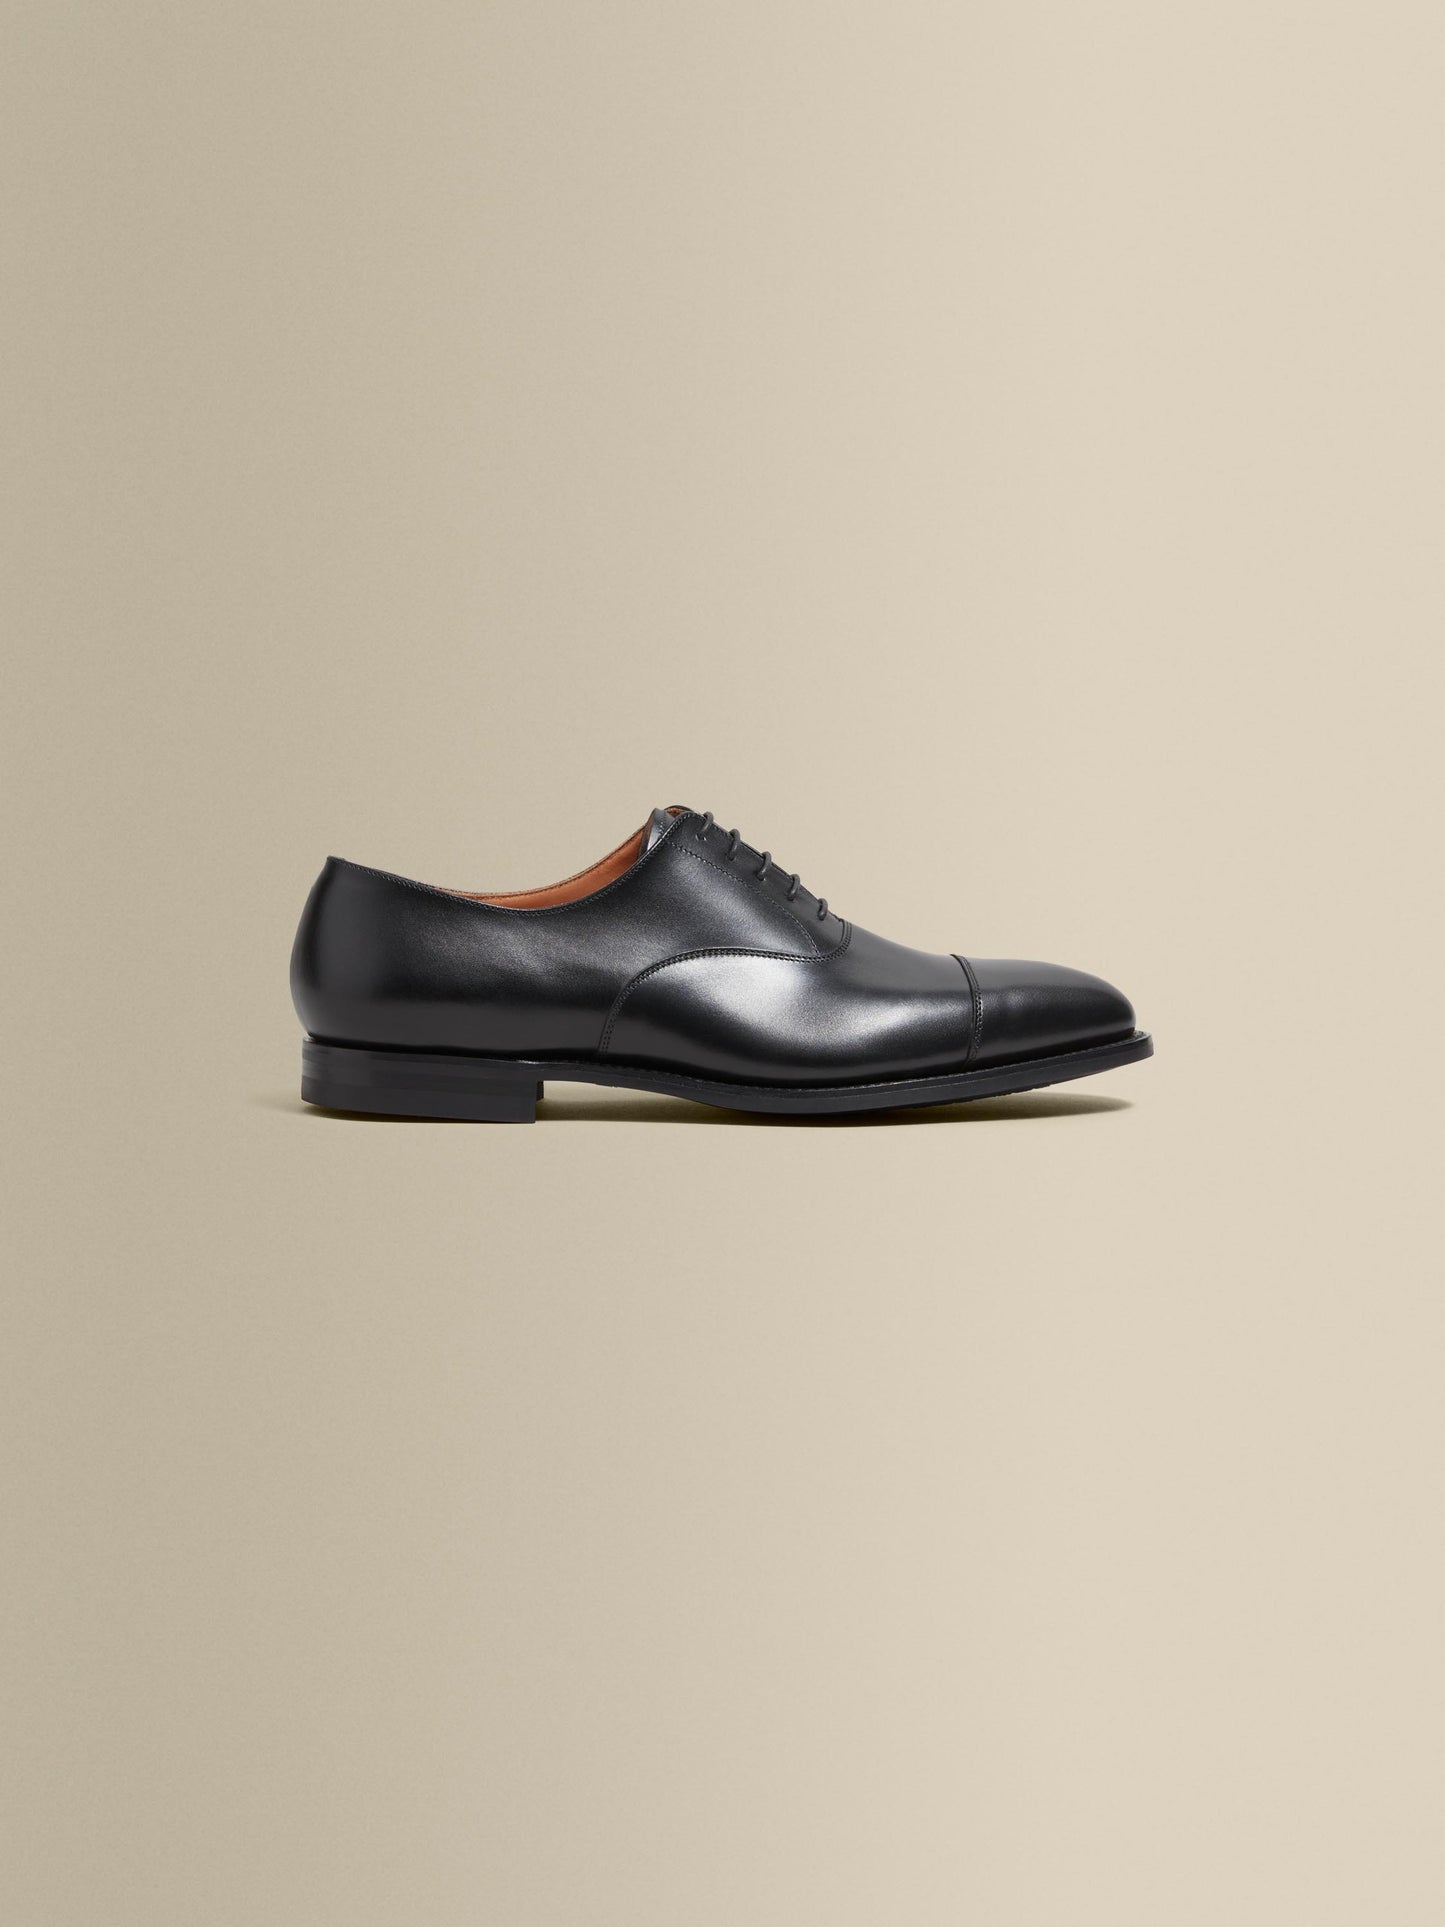 Calf Leather Oxford Shoes Black Product Image Side